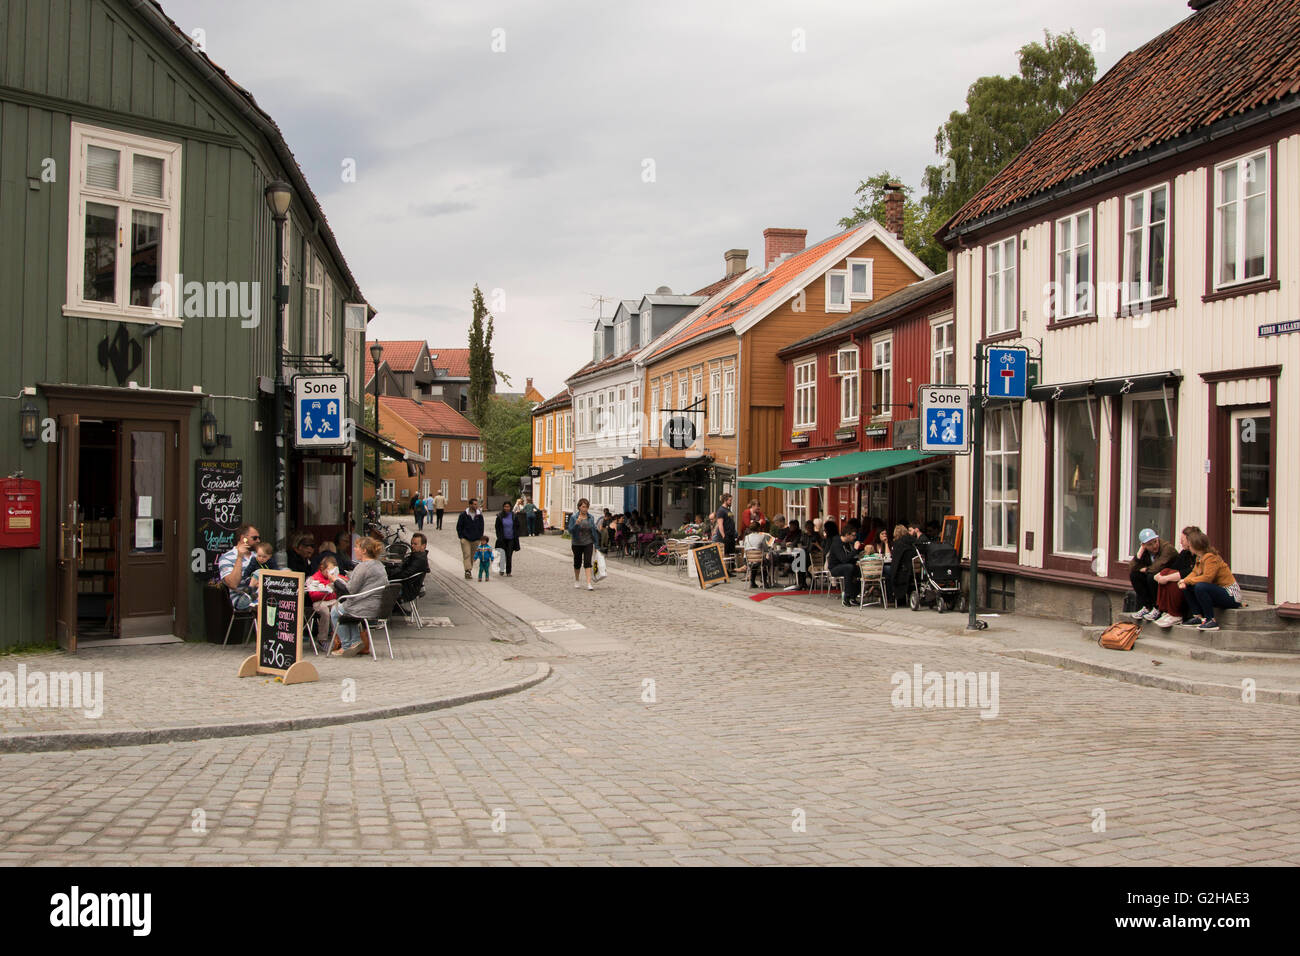 People on the streets of Bakklandet in Trondheim, Norway. Stock Photo